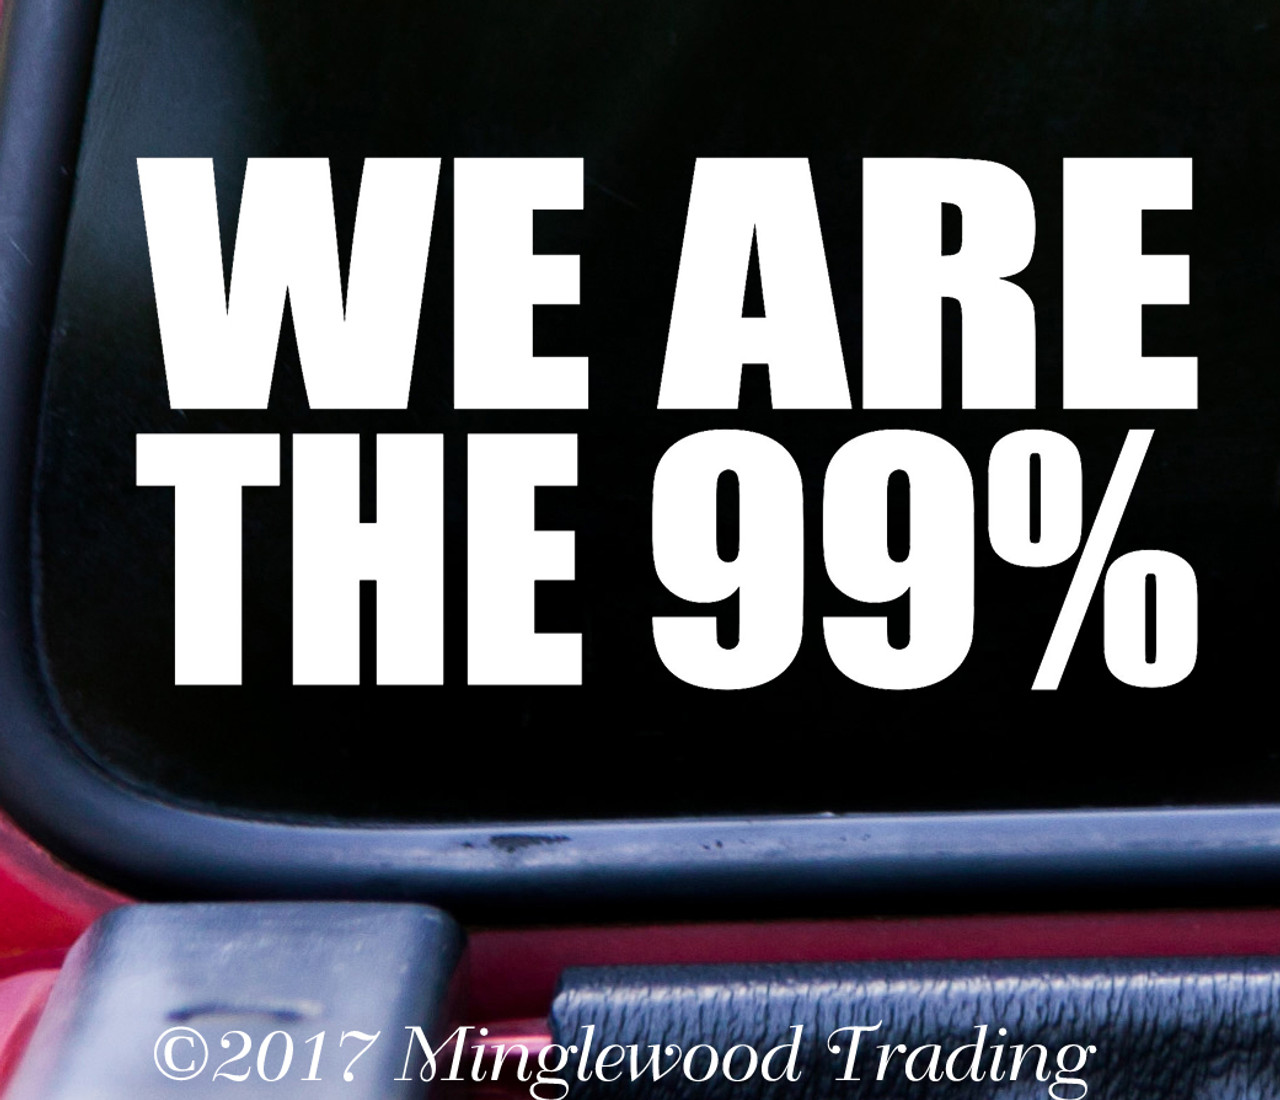 WE ARE THE 99% 5" x 2.5" Vinyl Decal Sticker - Occupy -  Inequality - 1% - 99 Percent